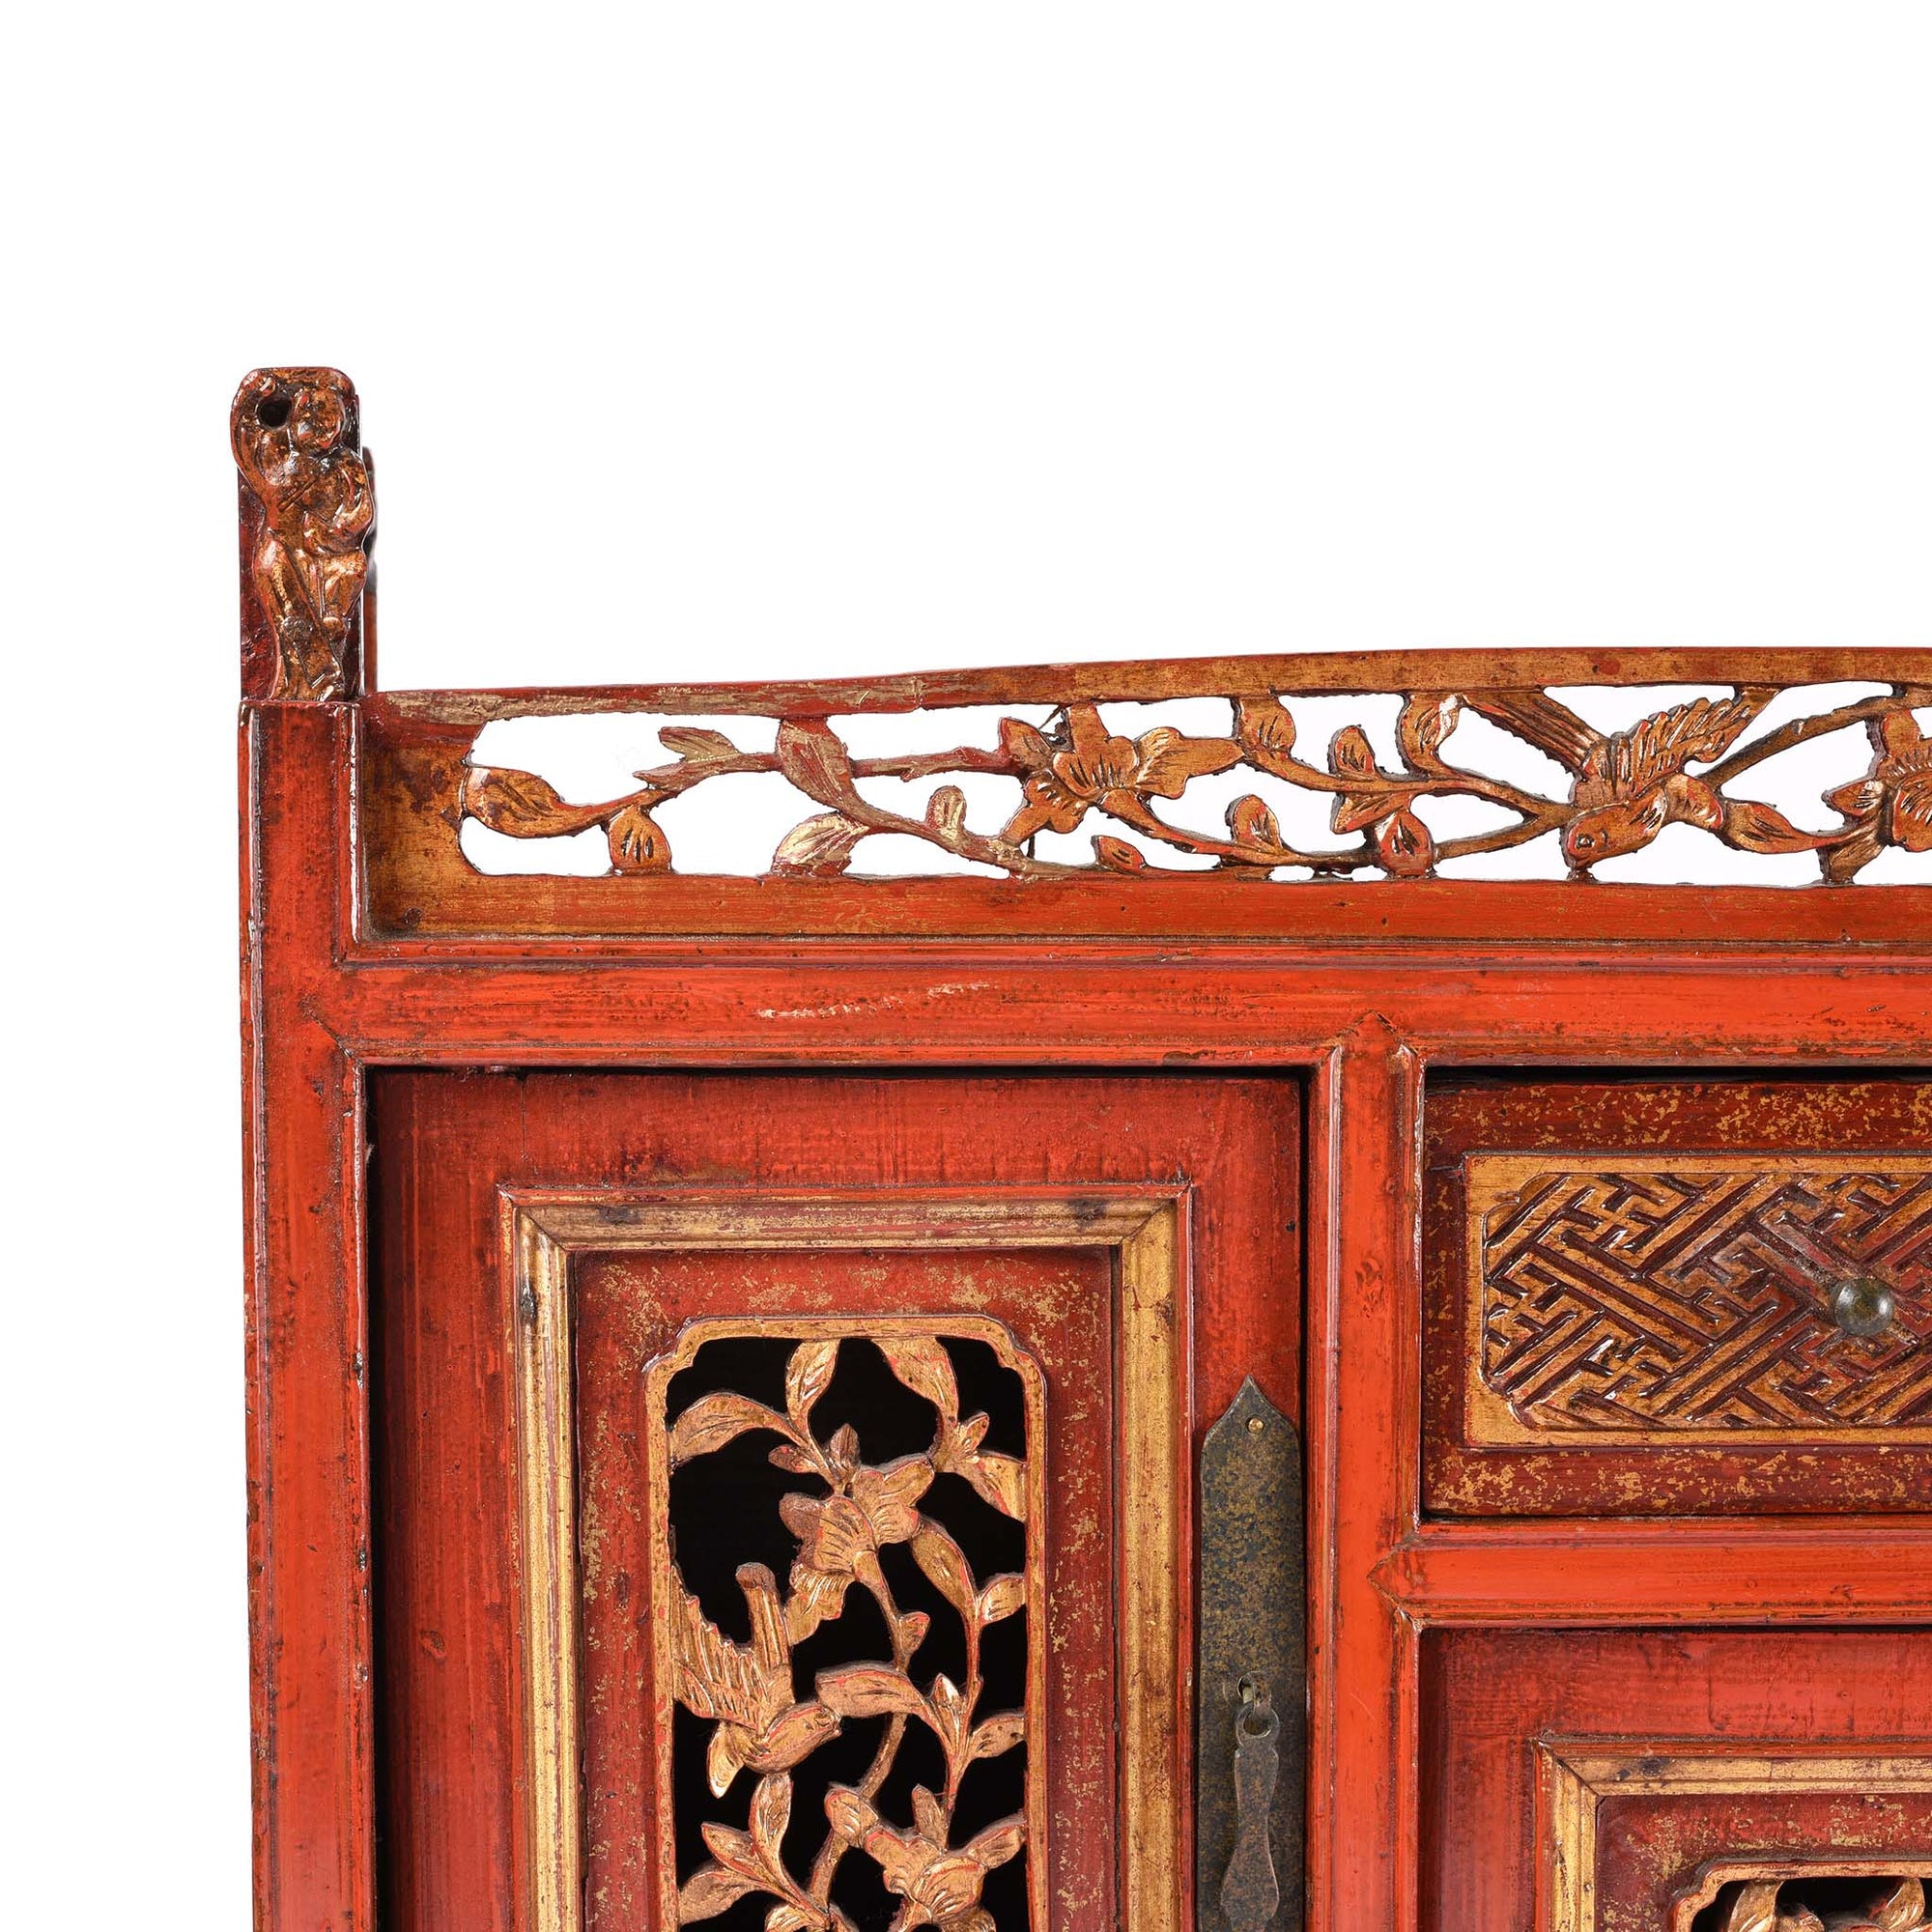 Red Lacquer Carved Altar Cabinet from Fujian Province - 19thC | Indigo Antiques